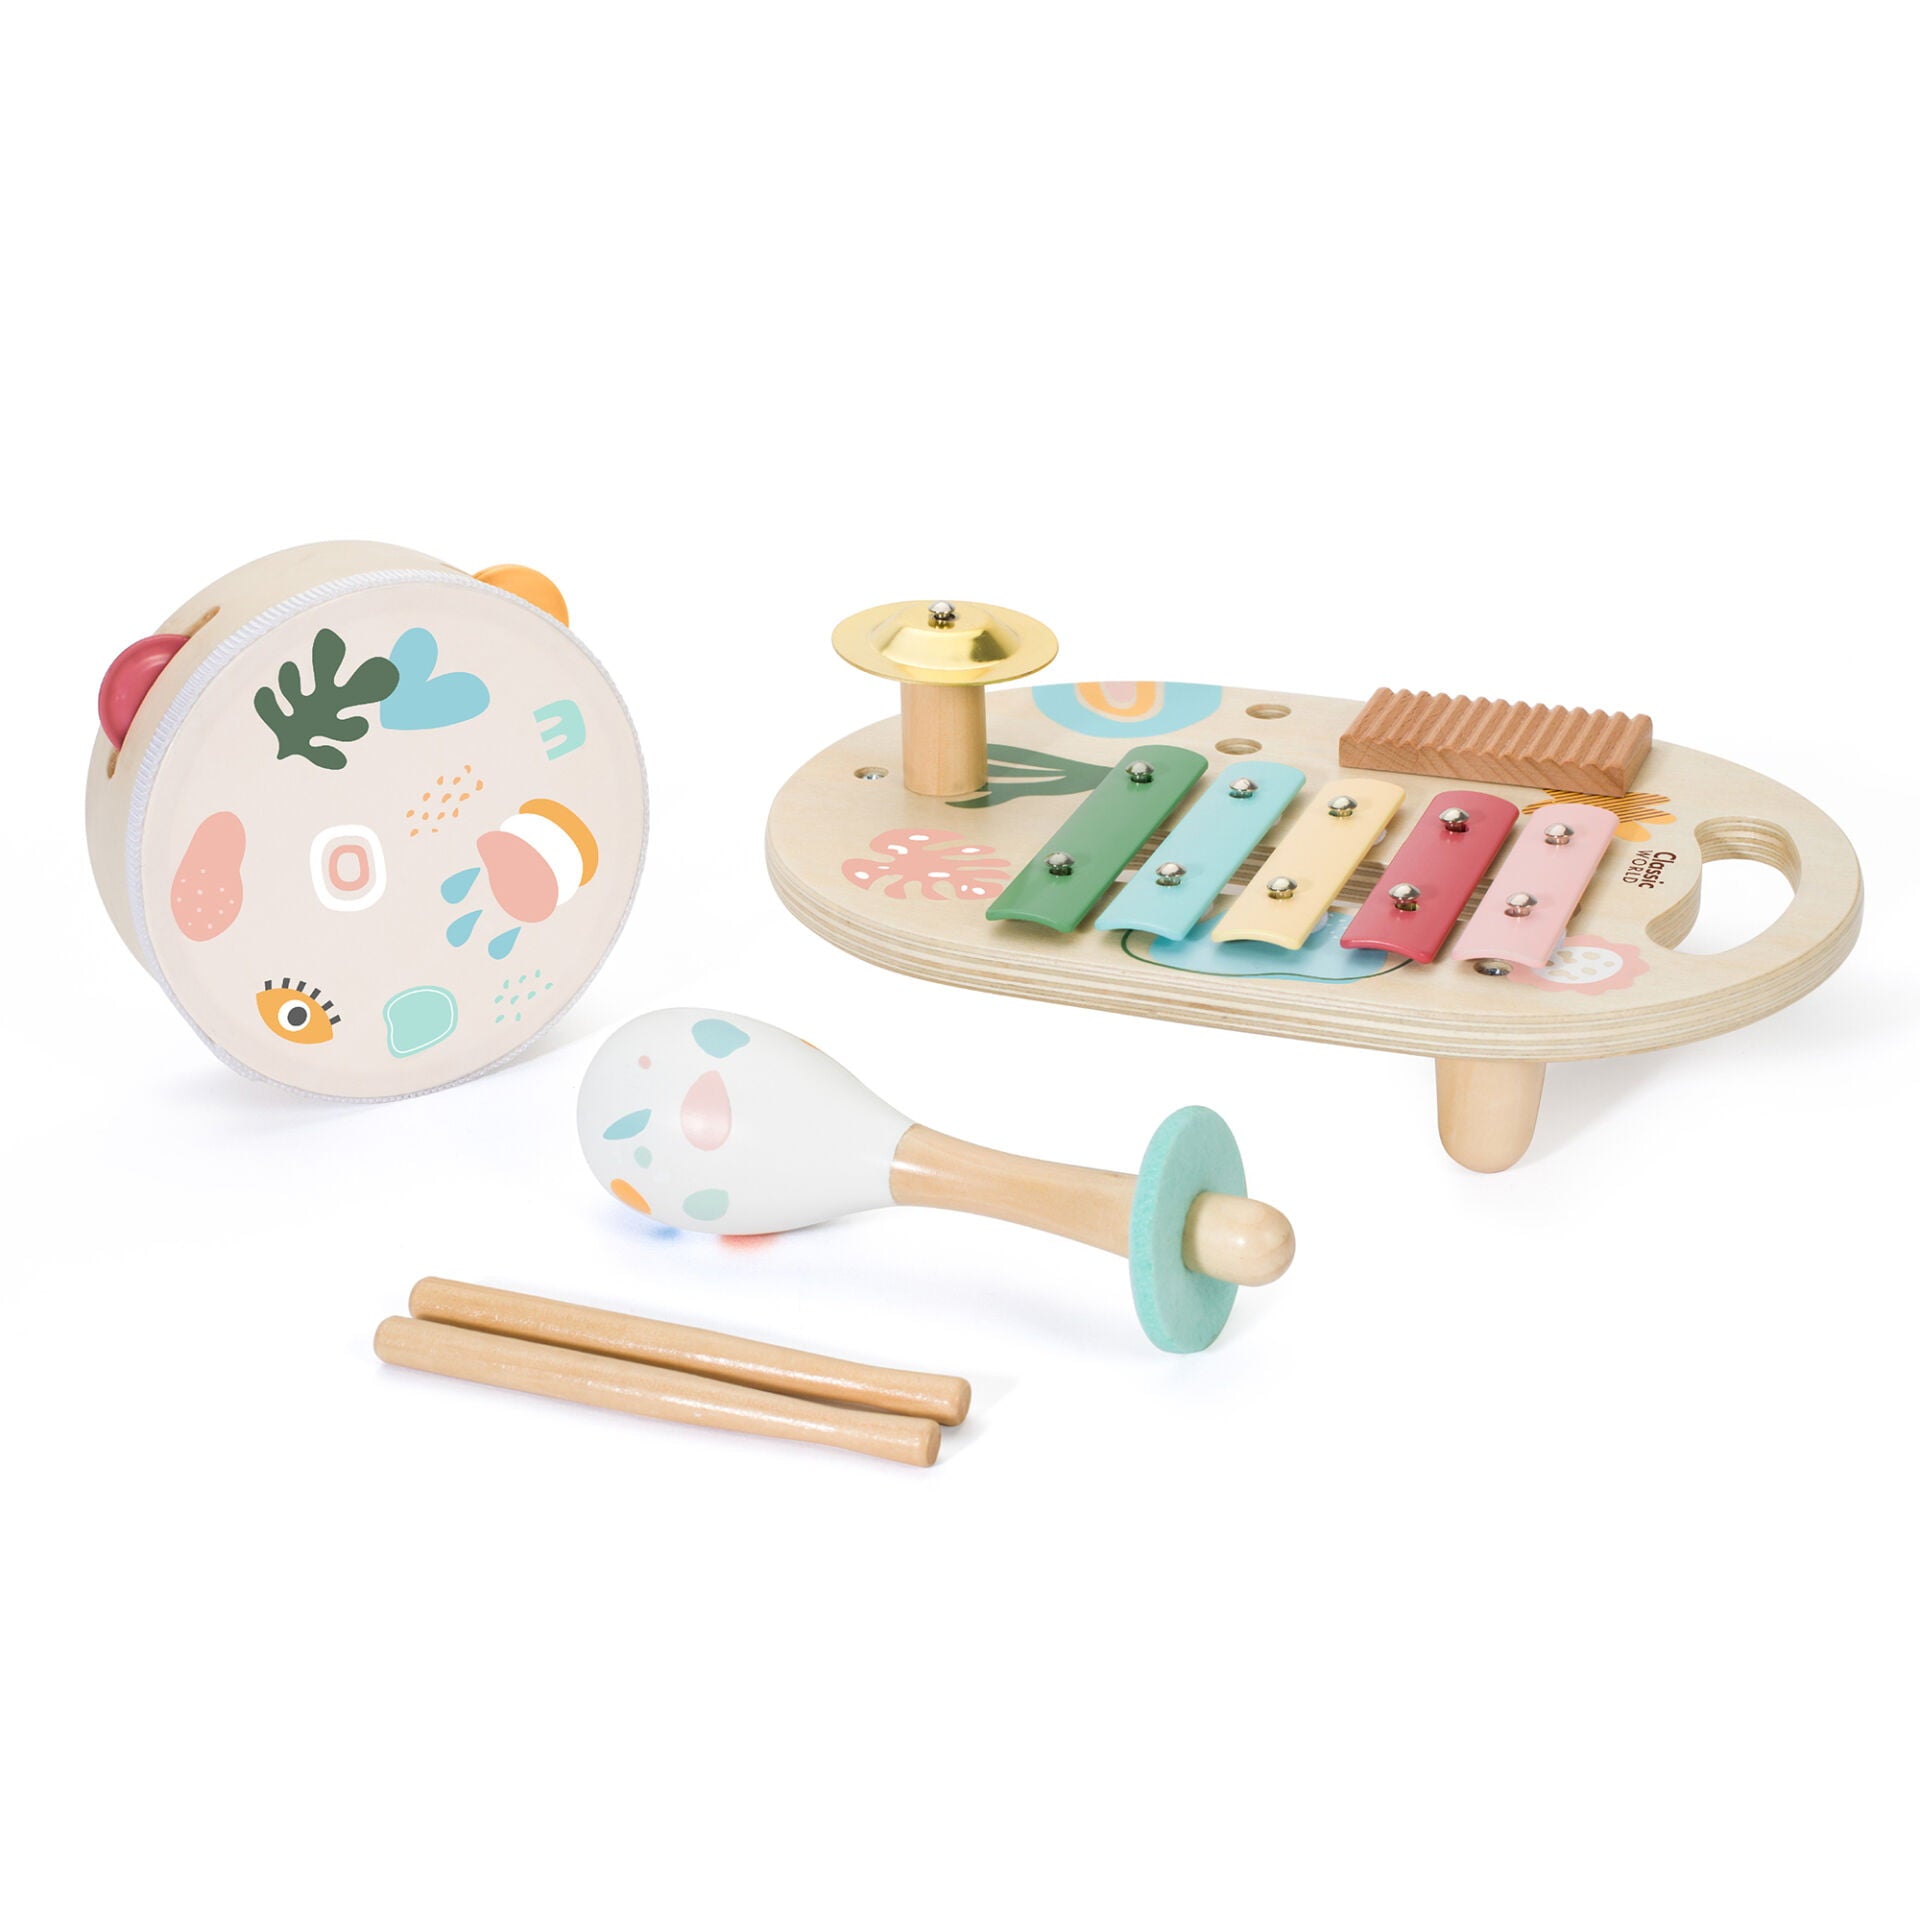 classic world set of 3 colourful insturments, a tambourine, xylophone and a maraca